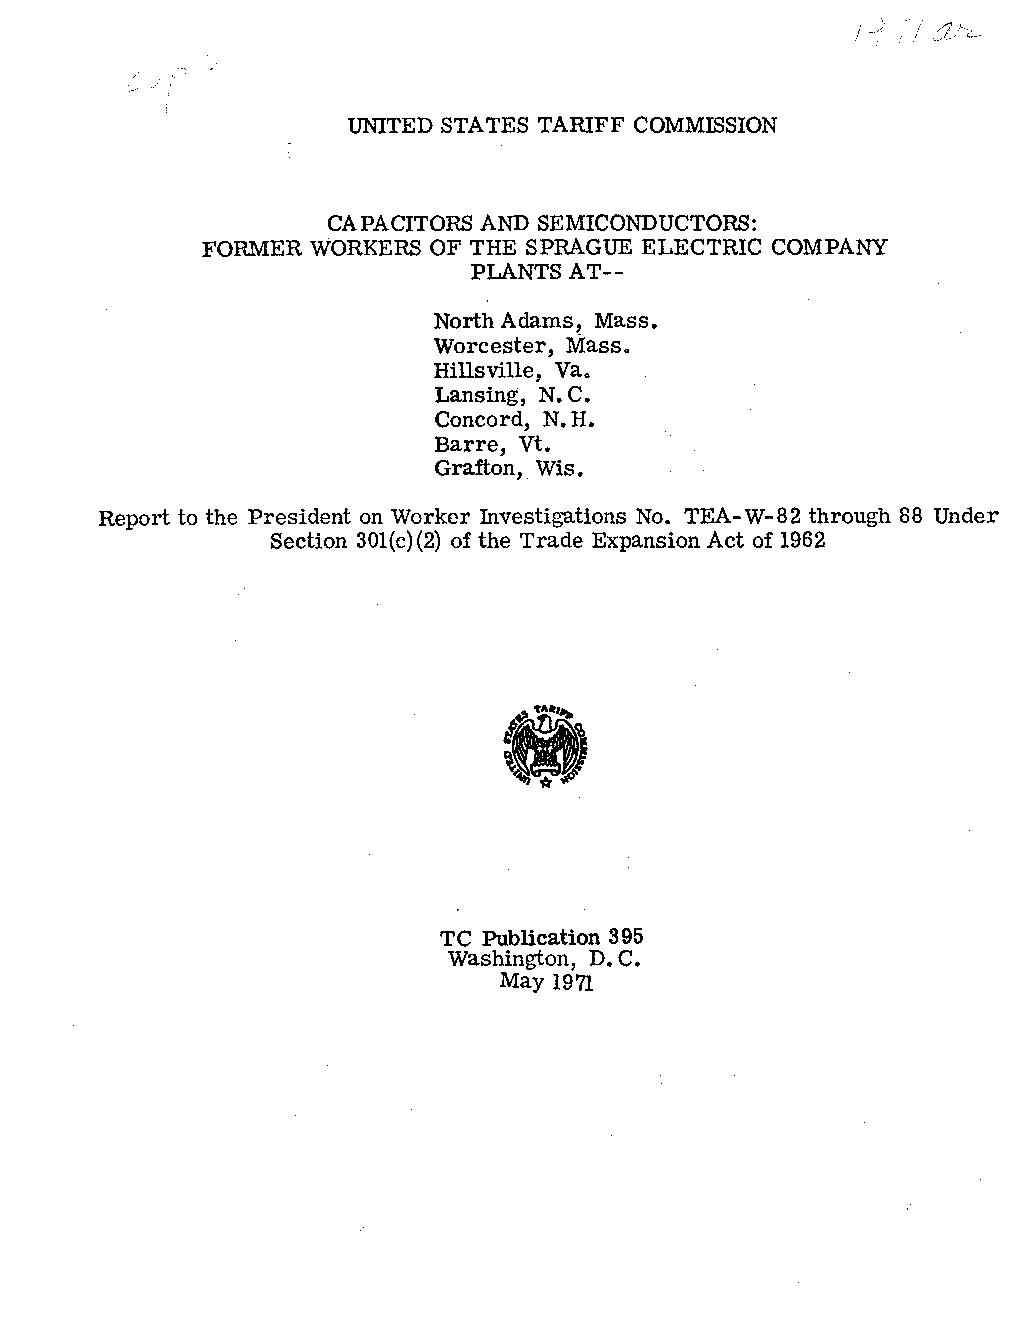 UNITED STATES TARIFF COMMISSION CAPACITORS and SEMICONDUCTORS: FORMER WORKERS of the SPRAGUE ELECTRIC COMPANY PLANTS AT-- North